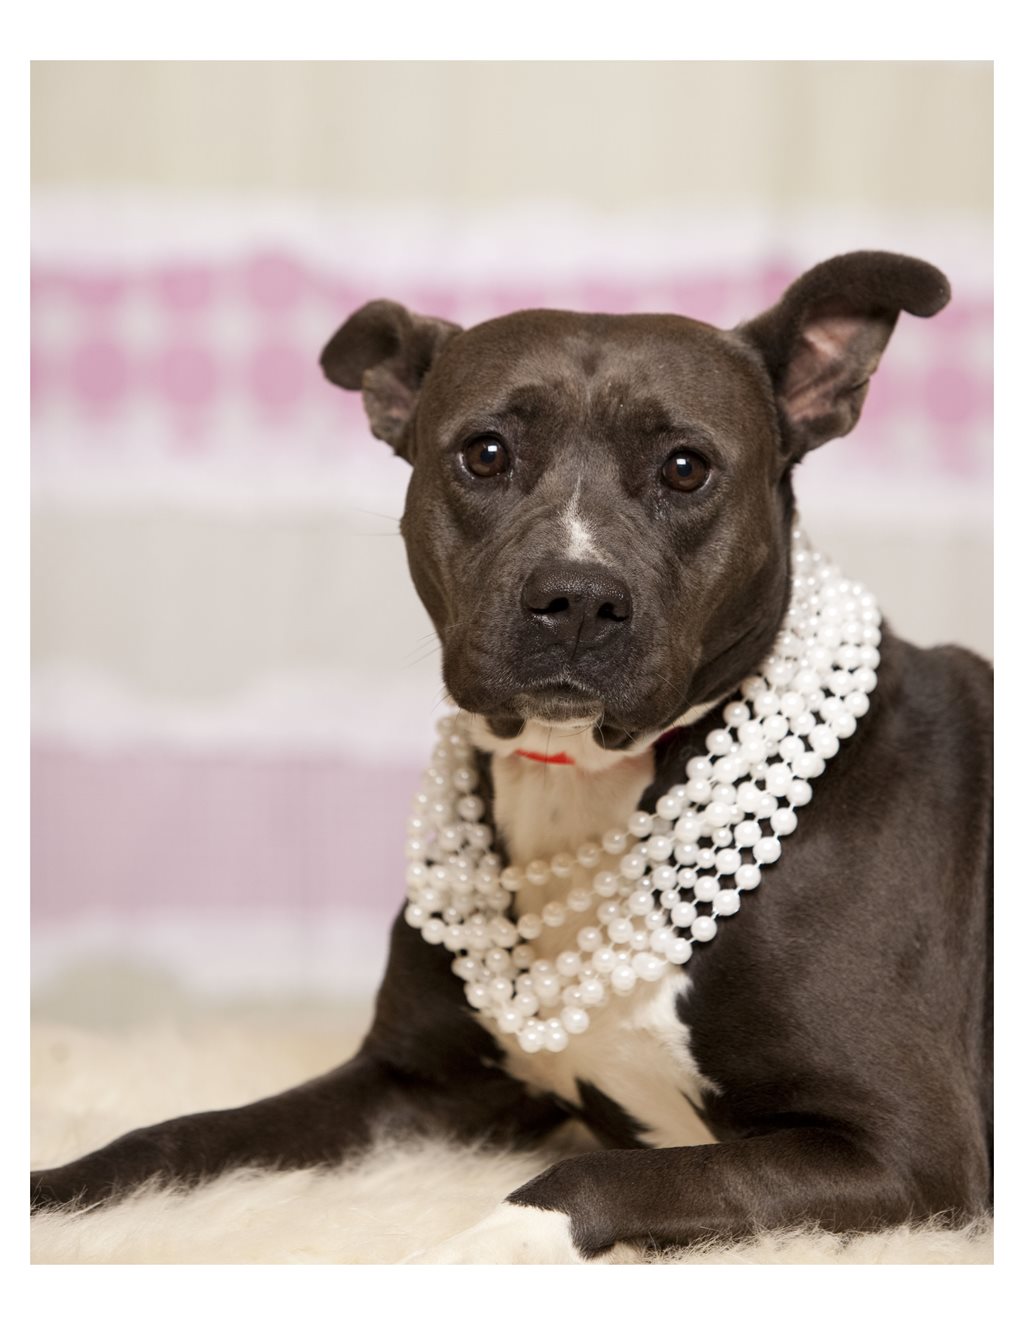 An adoptable dog with a lovely string of pearls around her neck. 